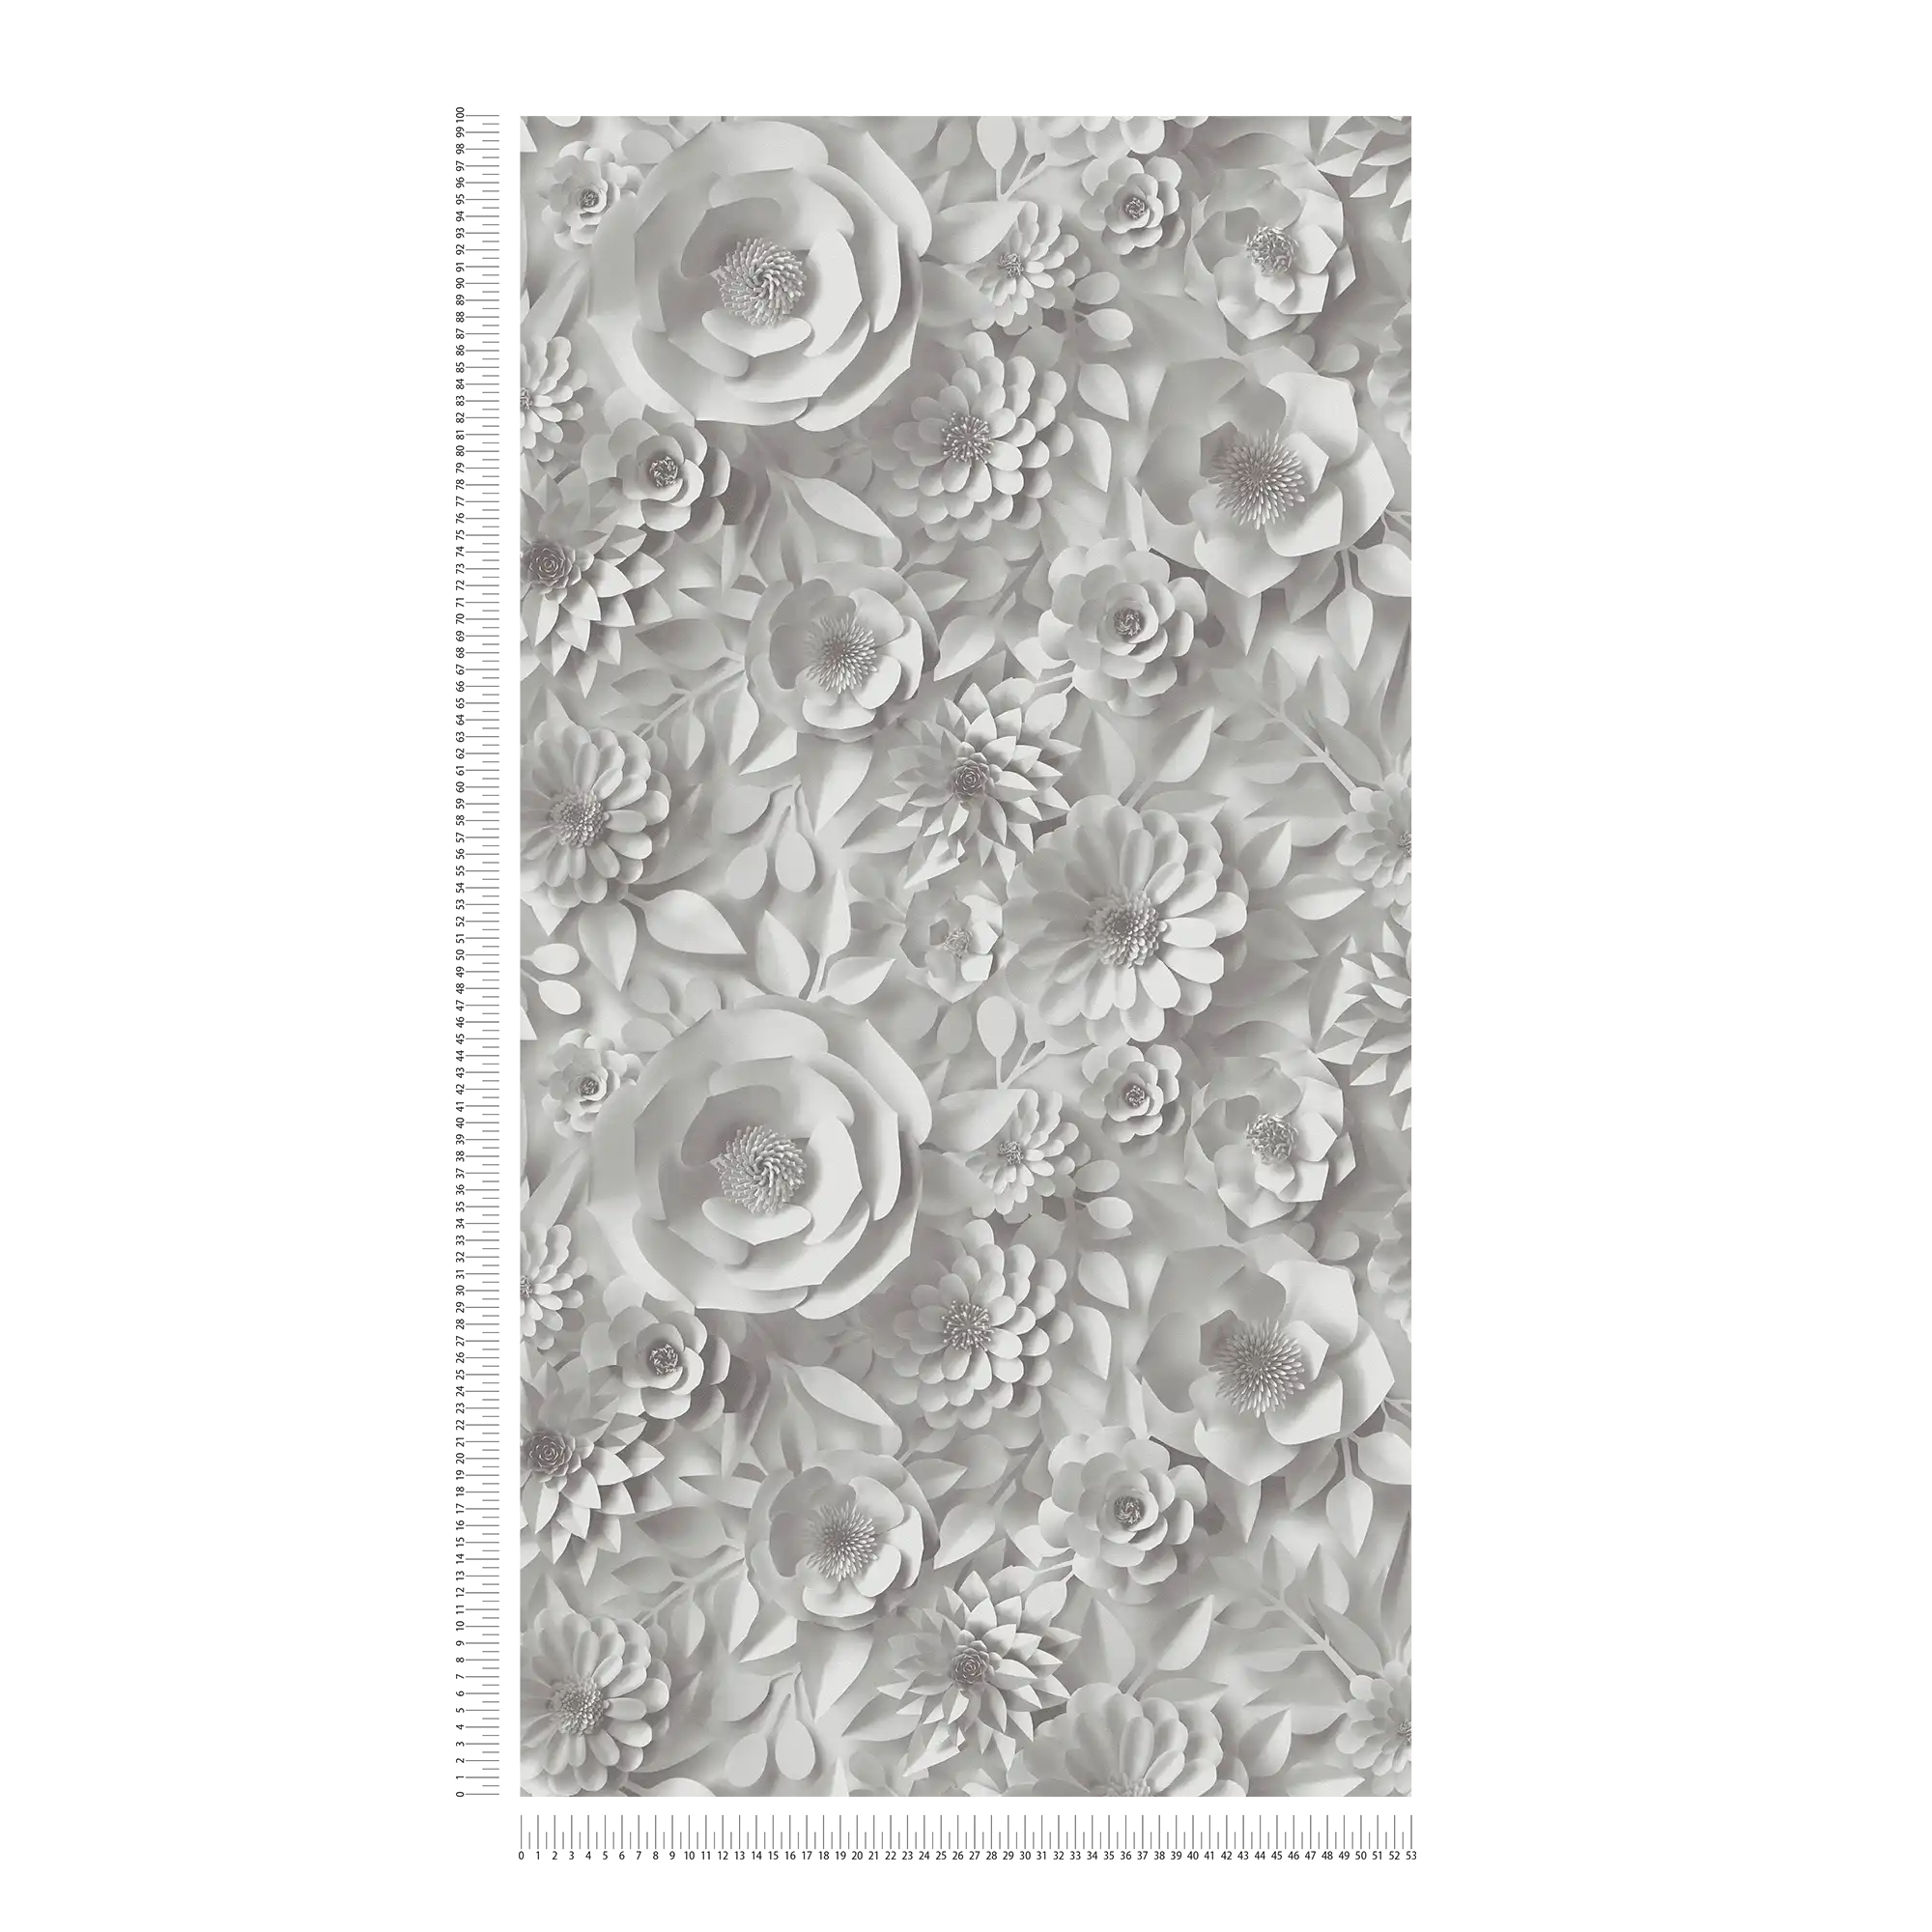             3D wallpaper with paper flowers, graphic floral pattern - white
        